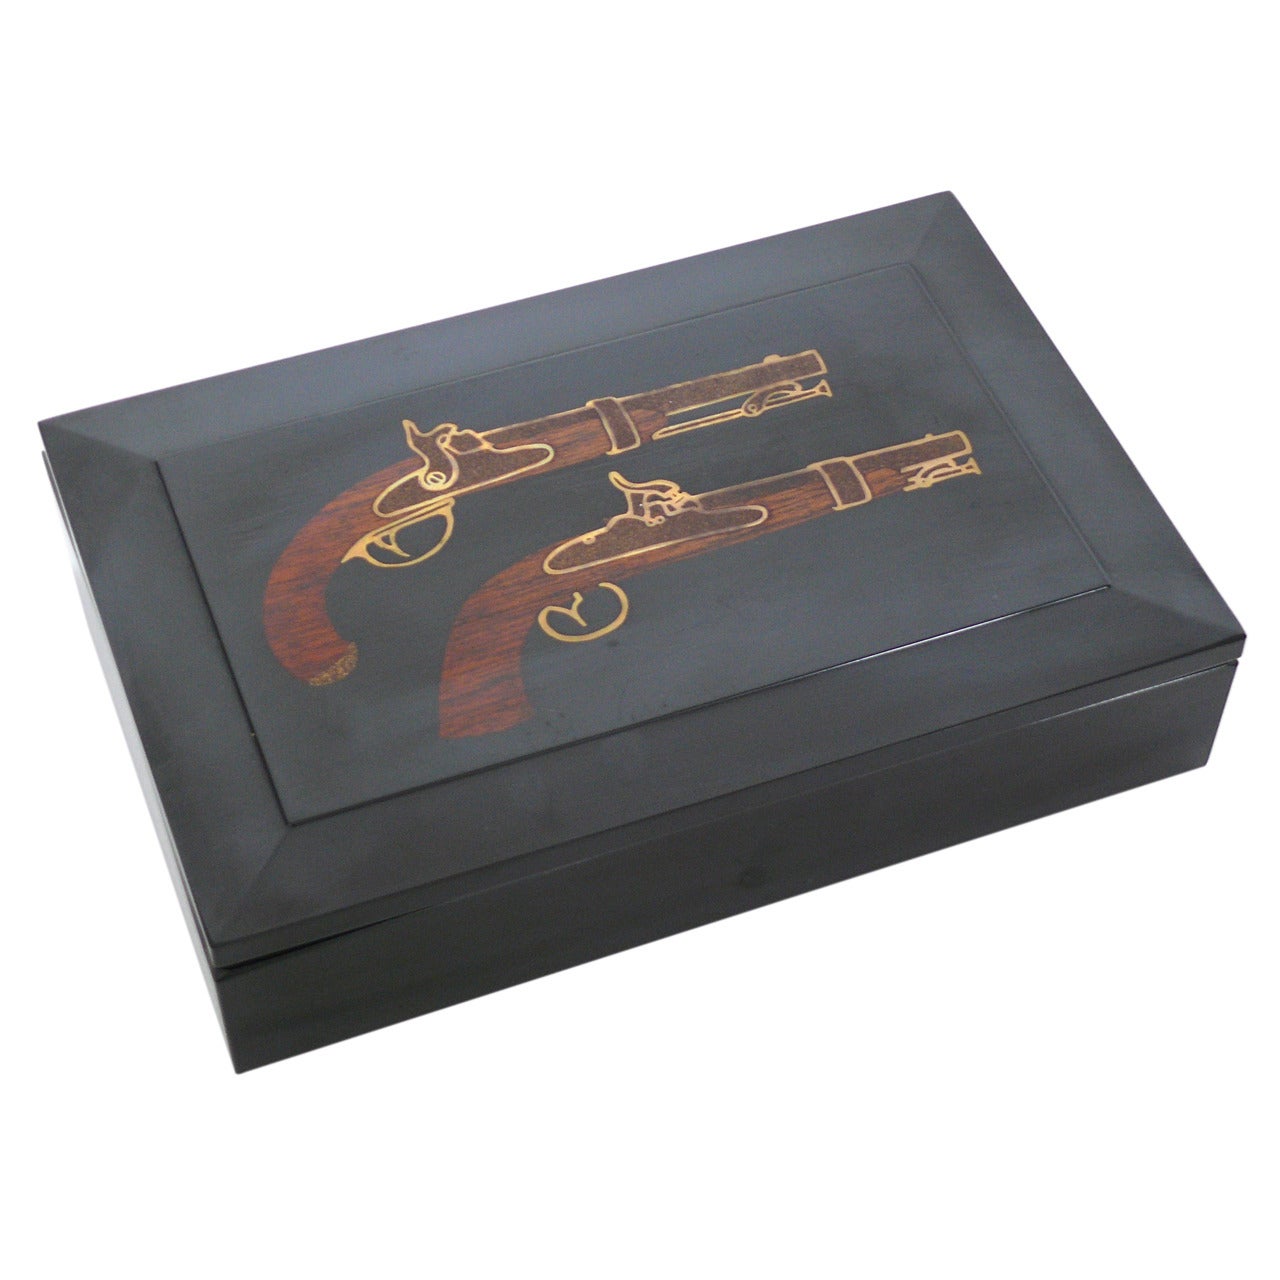 Dueling Pistols Box by Couroc